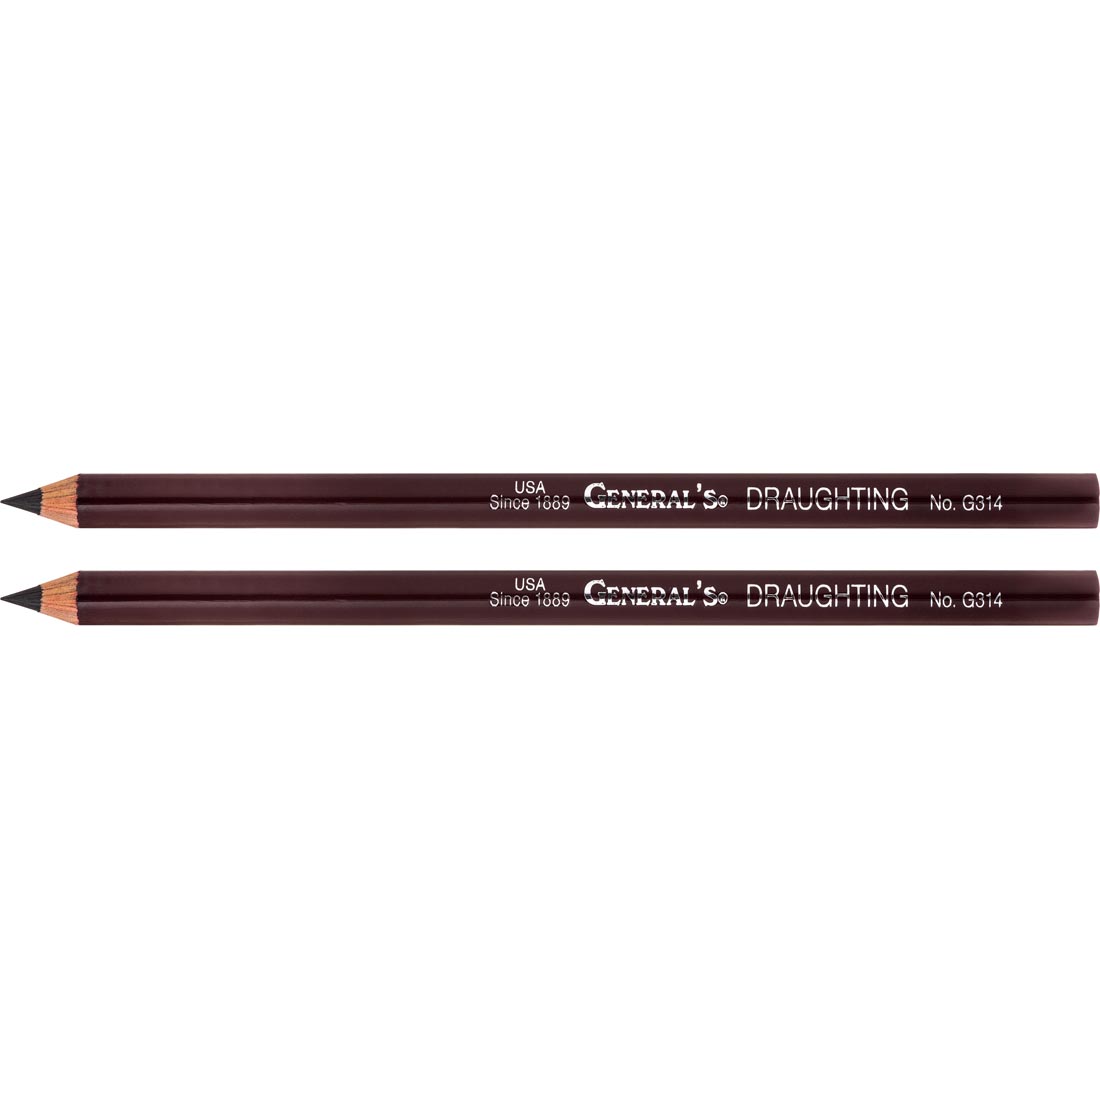 Two General's Draughting Pencils